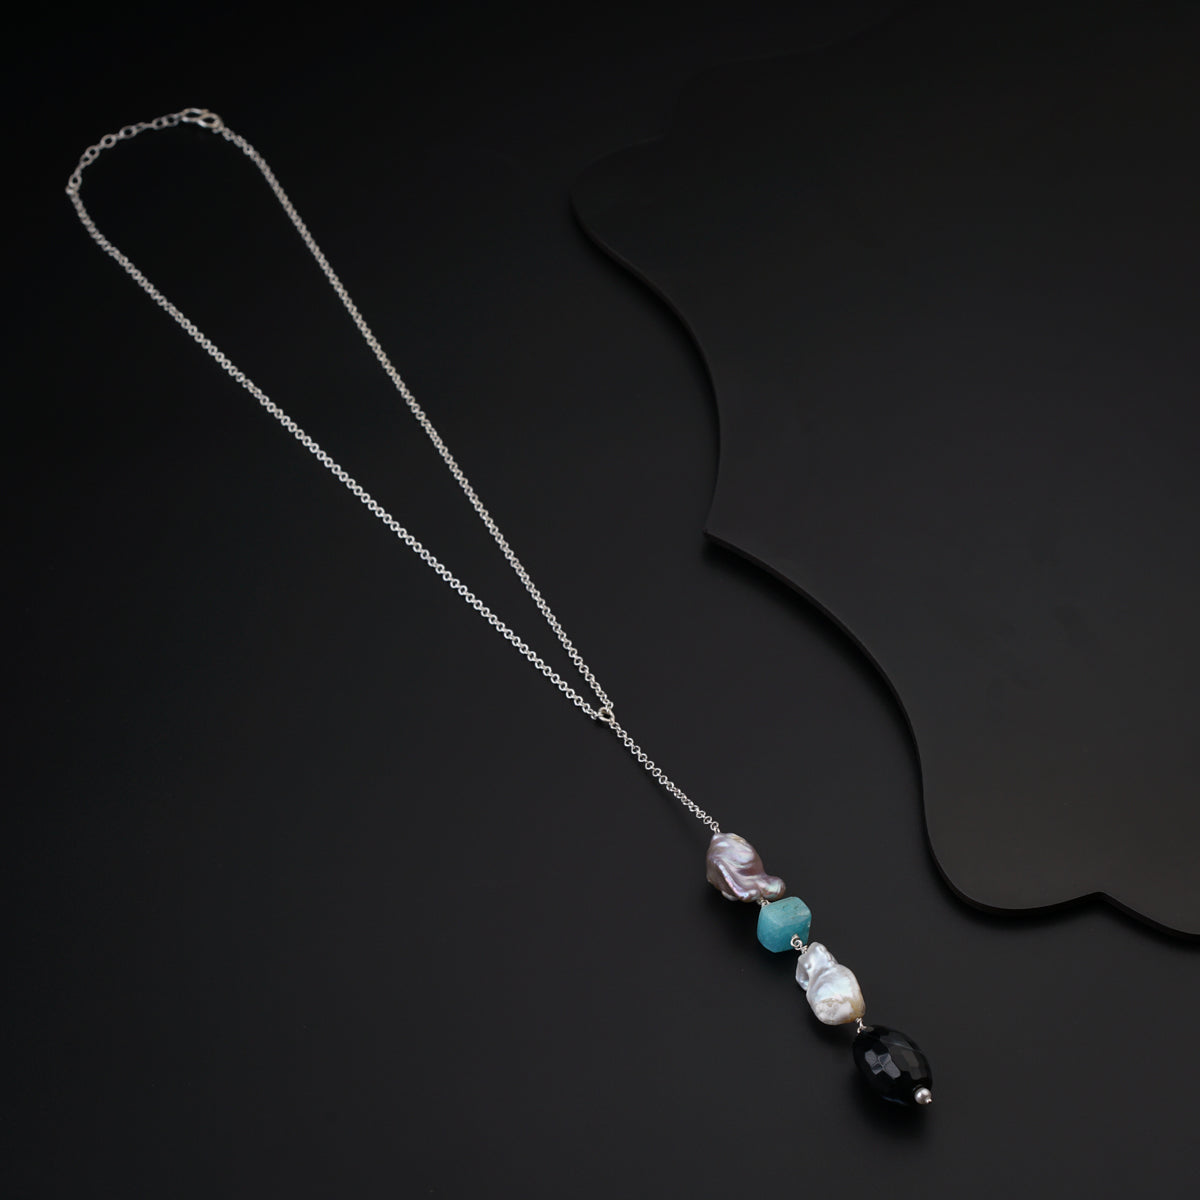 a necklace with three beads on a black background